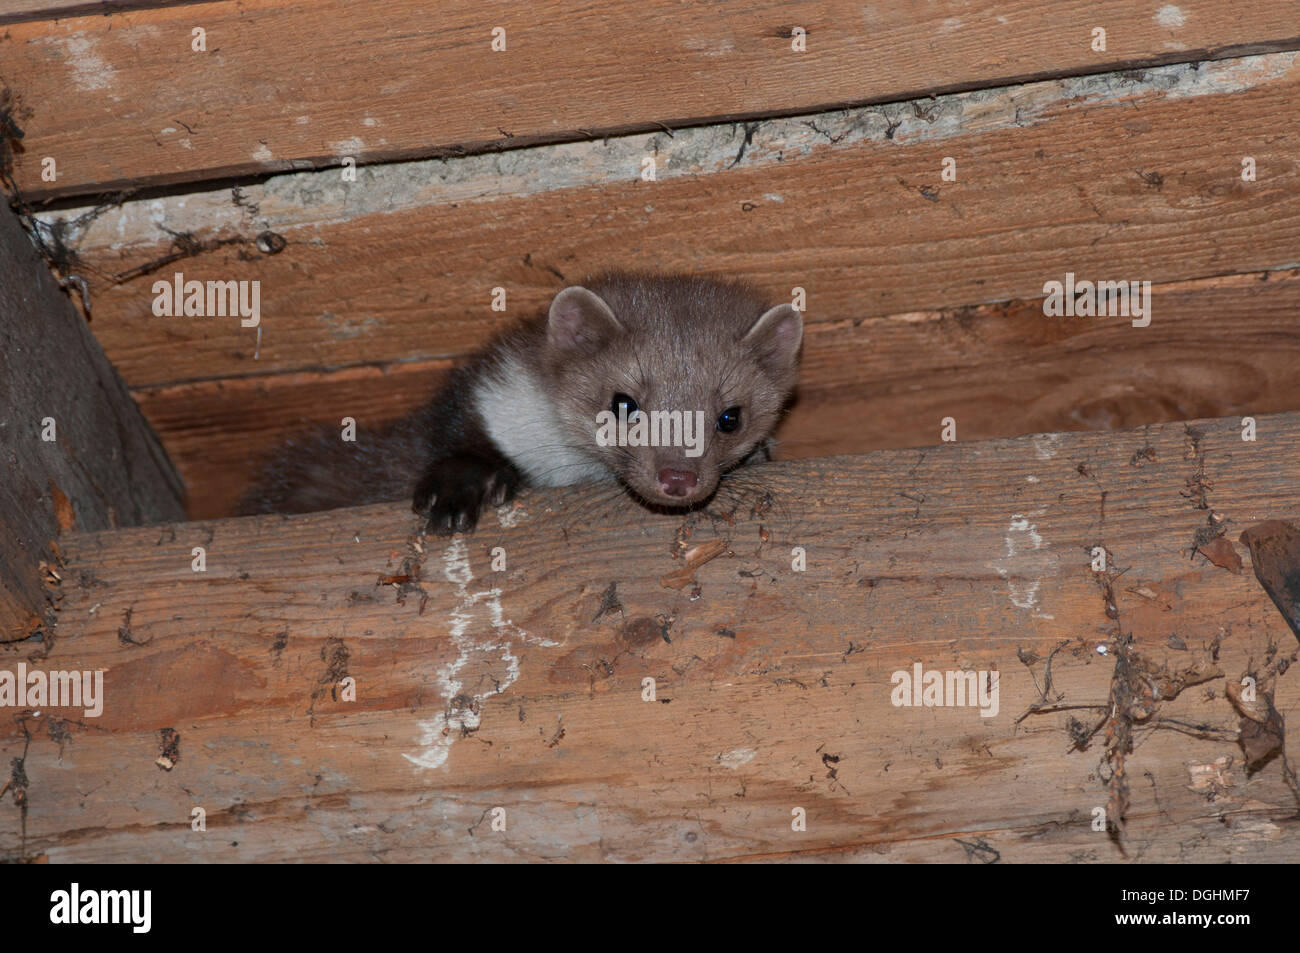 Young stone marten, beech marten or white breasted marten (Martes foina) looking down from the beam of a barn, Tyrol, Austria Stock Photo